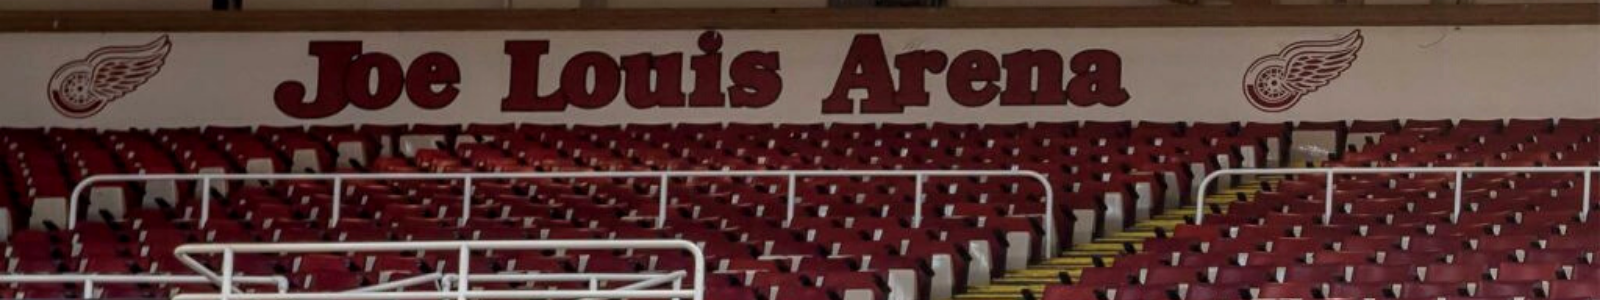 Seats From The Legendary Joe Louis Arena Now Up For Sale